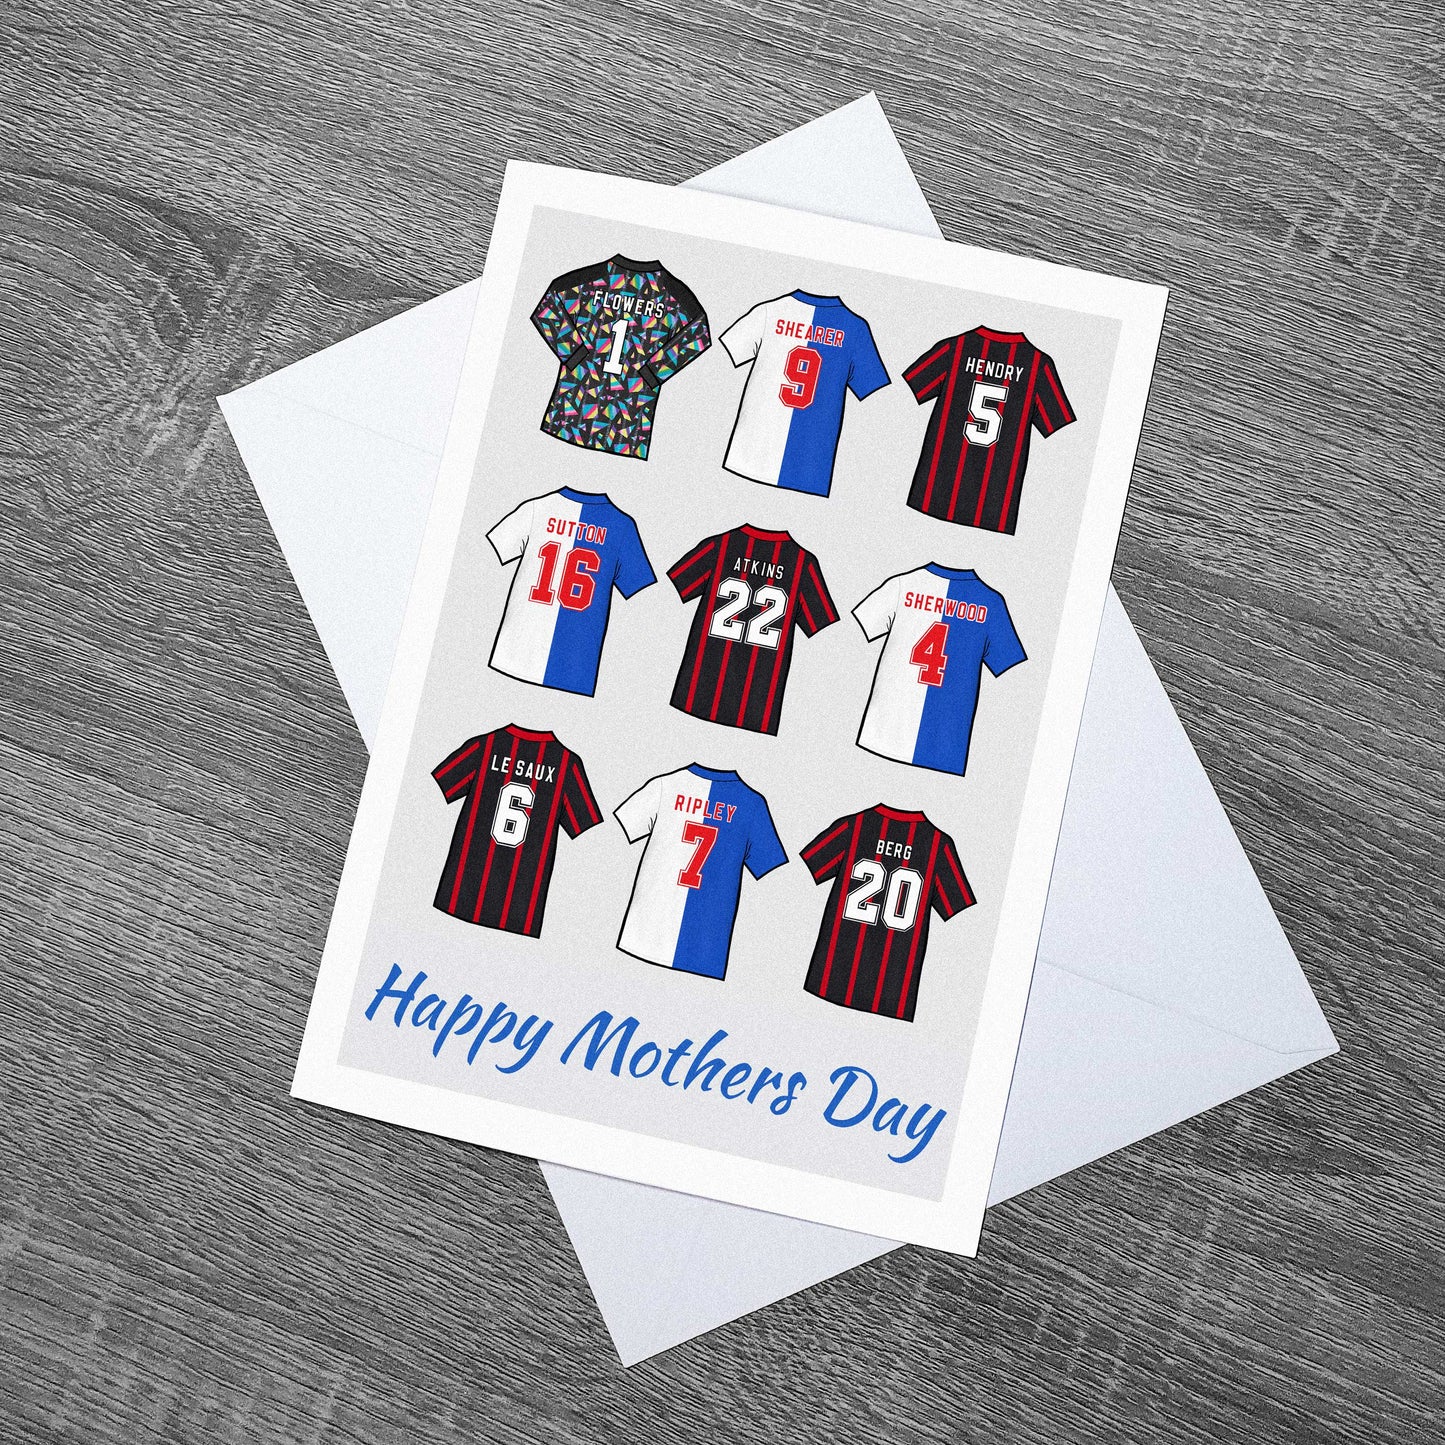 Mothers day card inspired by the legendary players to play for Blackburn Rovers